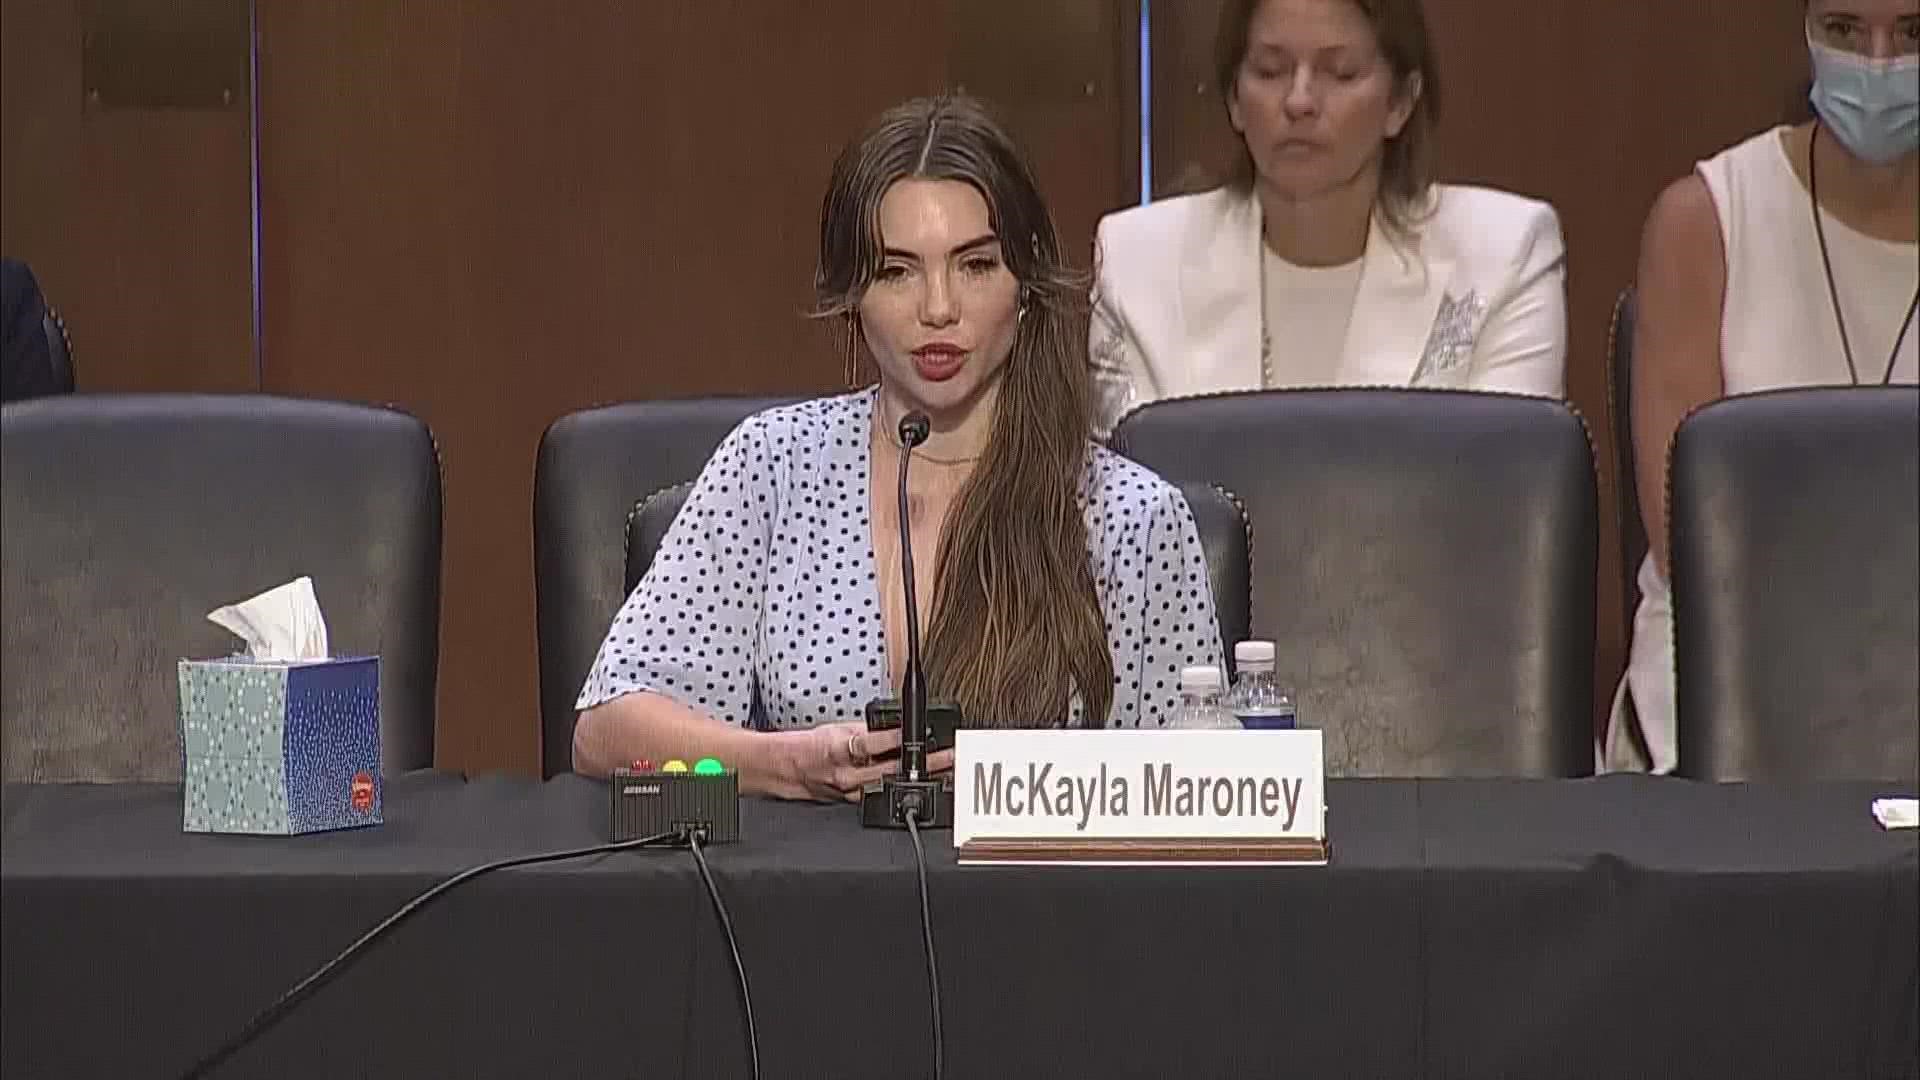 McKayla Maroney, another gold medal winning gymnast, told senators that one night when she was 15 years old, she found the doctor on top of her while she was naked